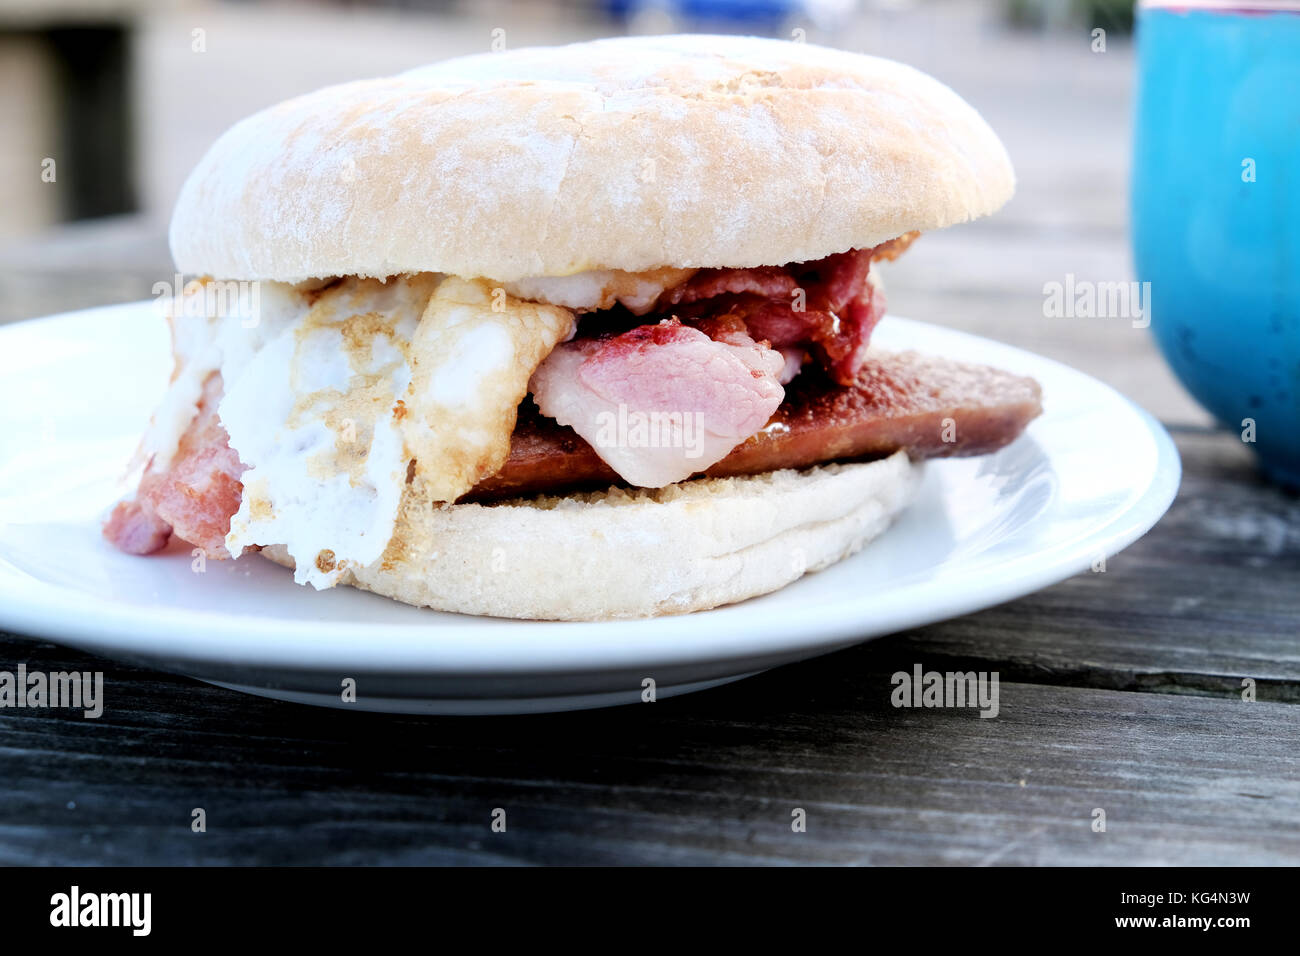 A tasty, mouth watering, breakfast bap made up of Sausage, bacon and egg bought from an outdoor café in Bristol, England, UK Stock Photo